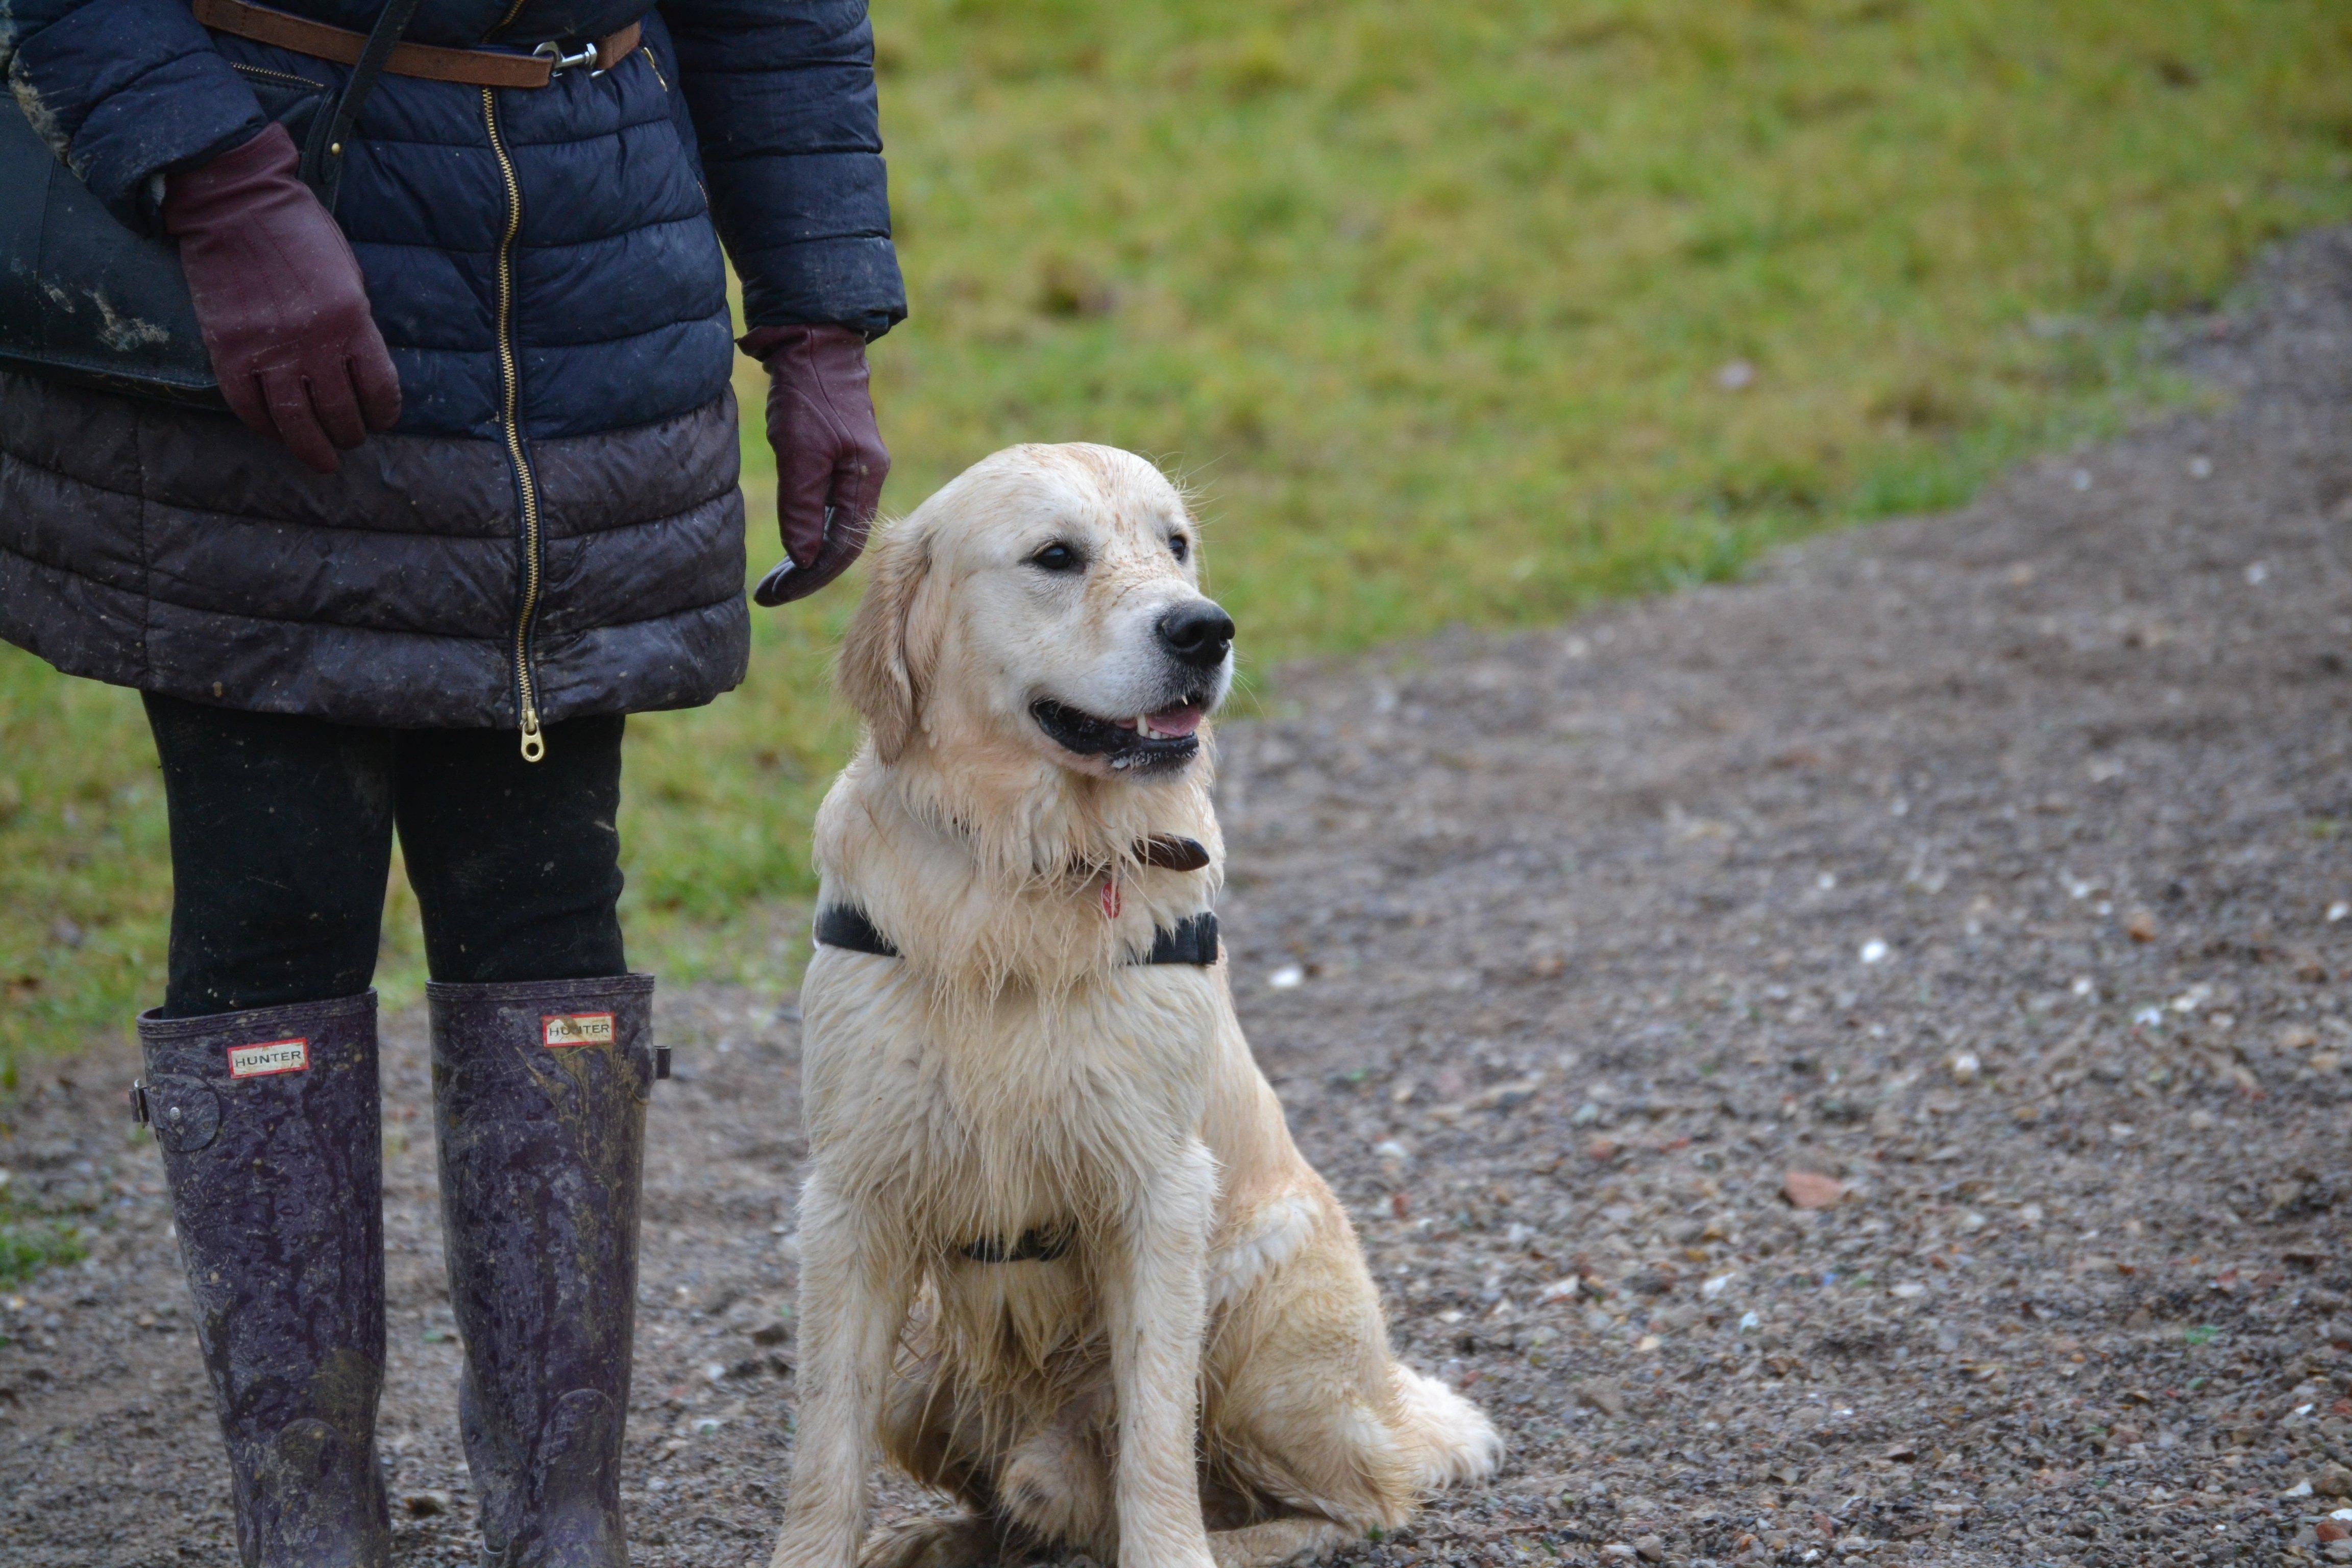 Nearly 30 dogs and their owners met for the first  Kent and Sussex Golden Retrievers meeting of 2020, photo courtesy of Millie Goad